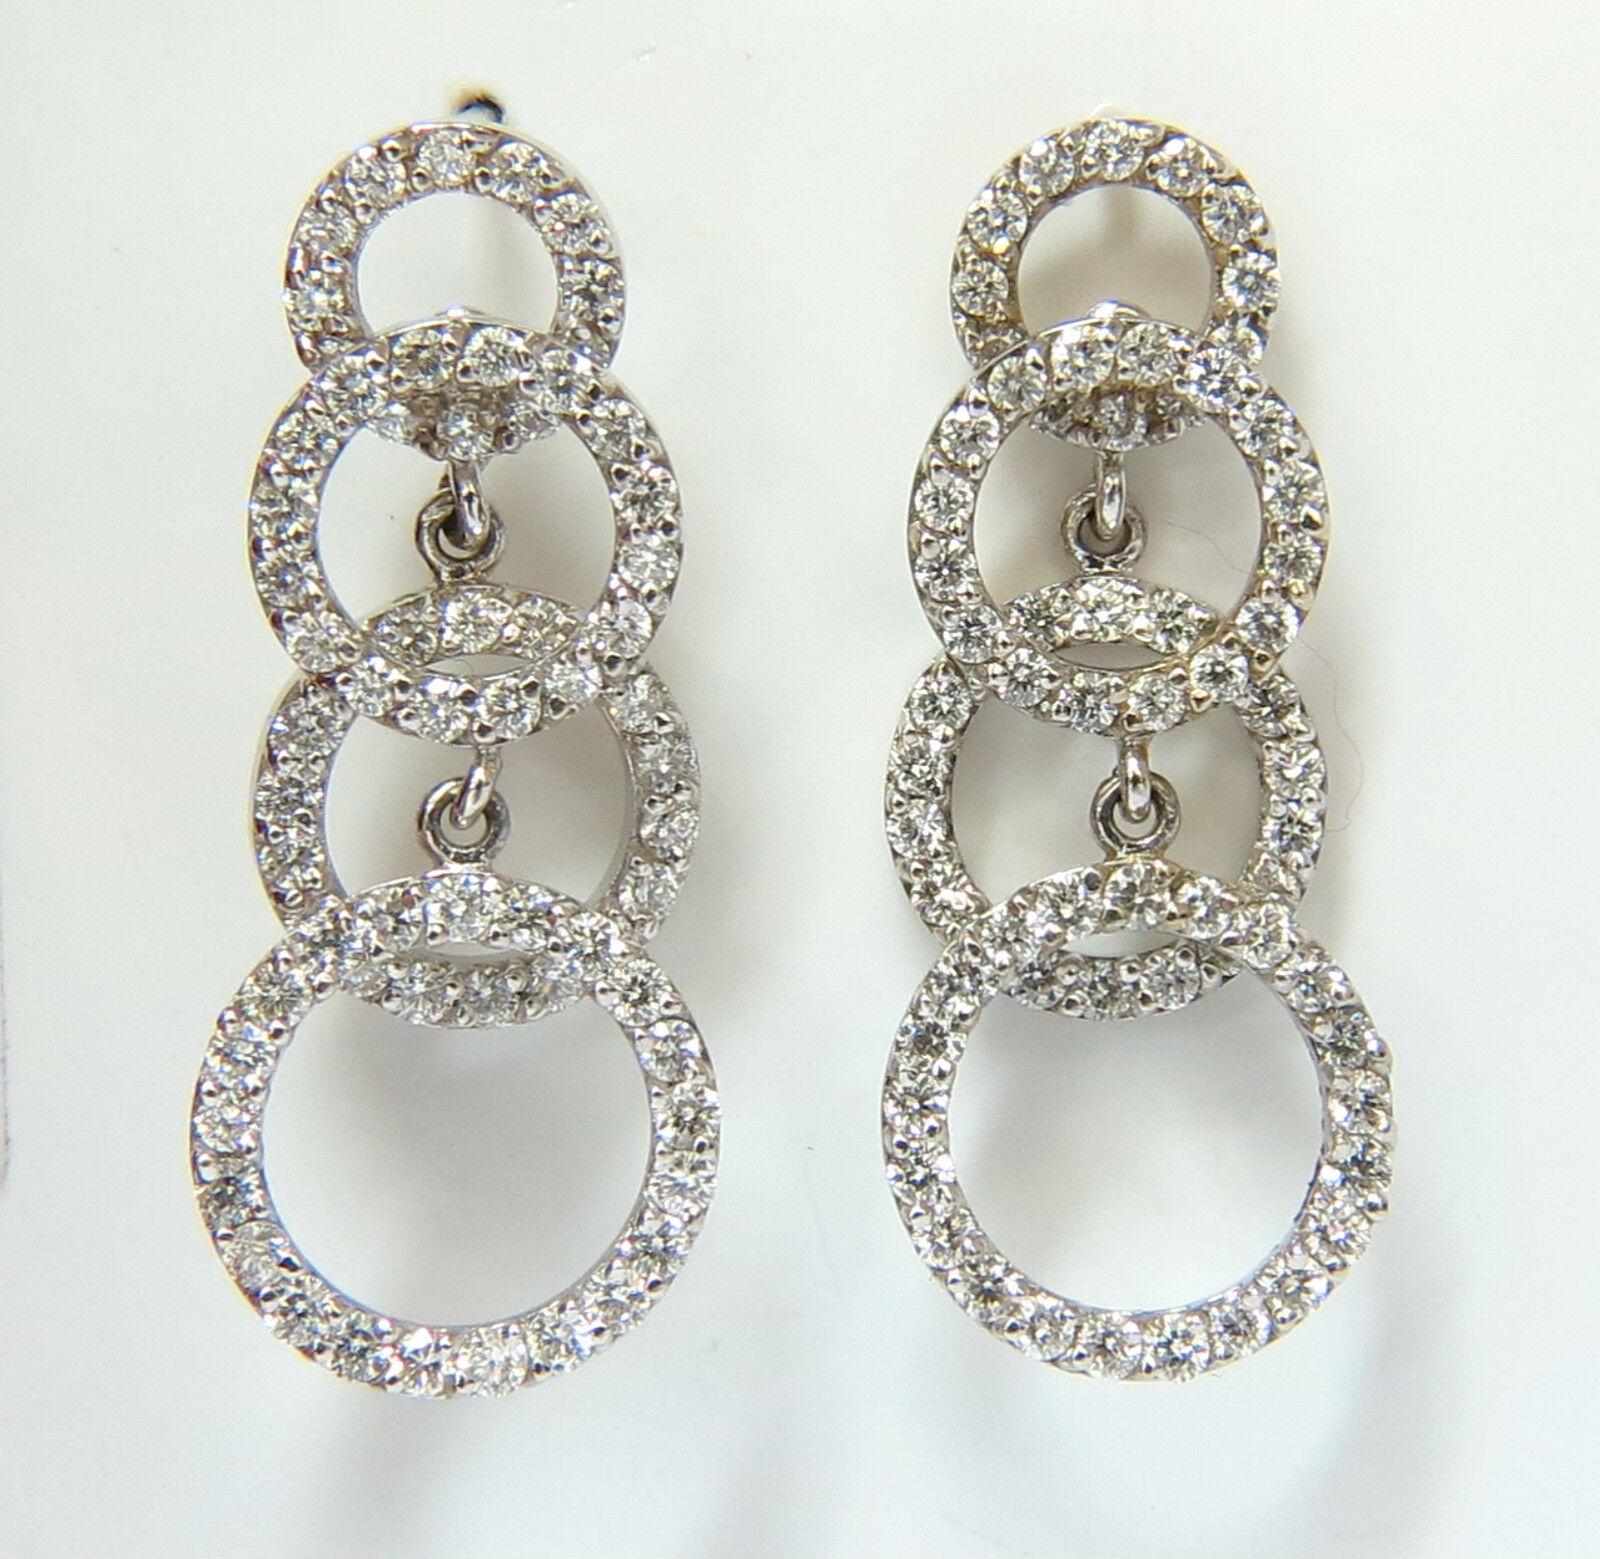 Modern Dangle Deco

Diamond dangle earrings

2.00ct. Diamonds 

G-H color, Vs-2 Si-1 clarity.

14kt. white gold

7.1 grams.

Measures:

30mm long &

12.40mm wide at lower circle

8.12mm at upper circle

$5200 appraisal will accompany



Its time to